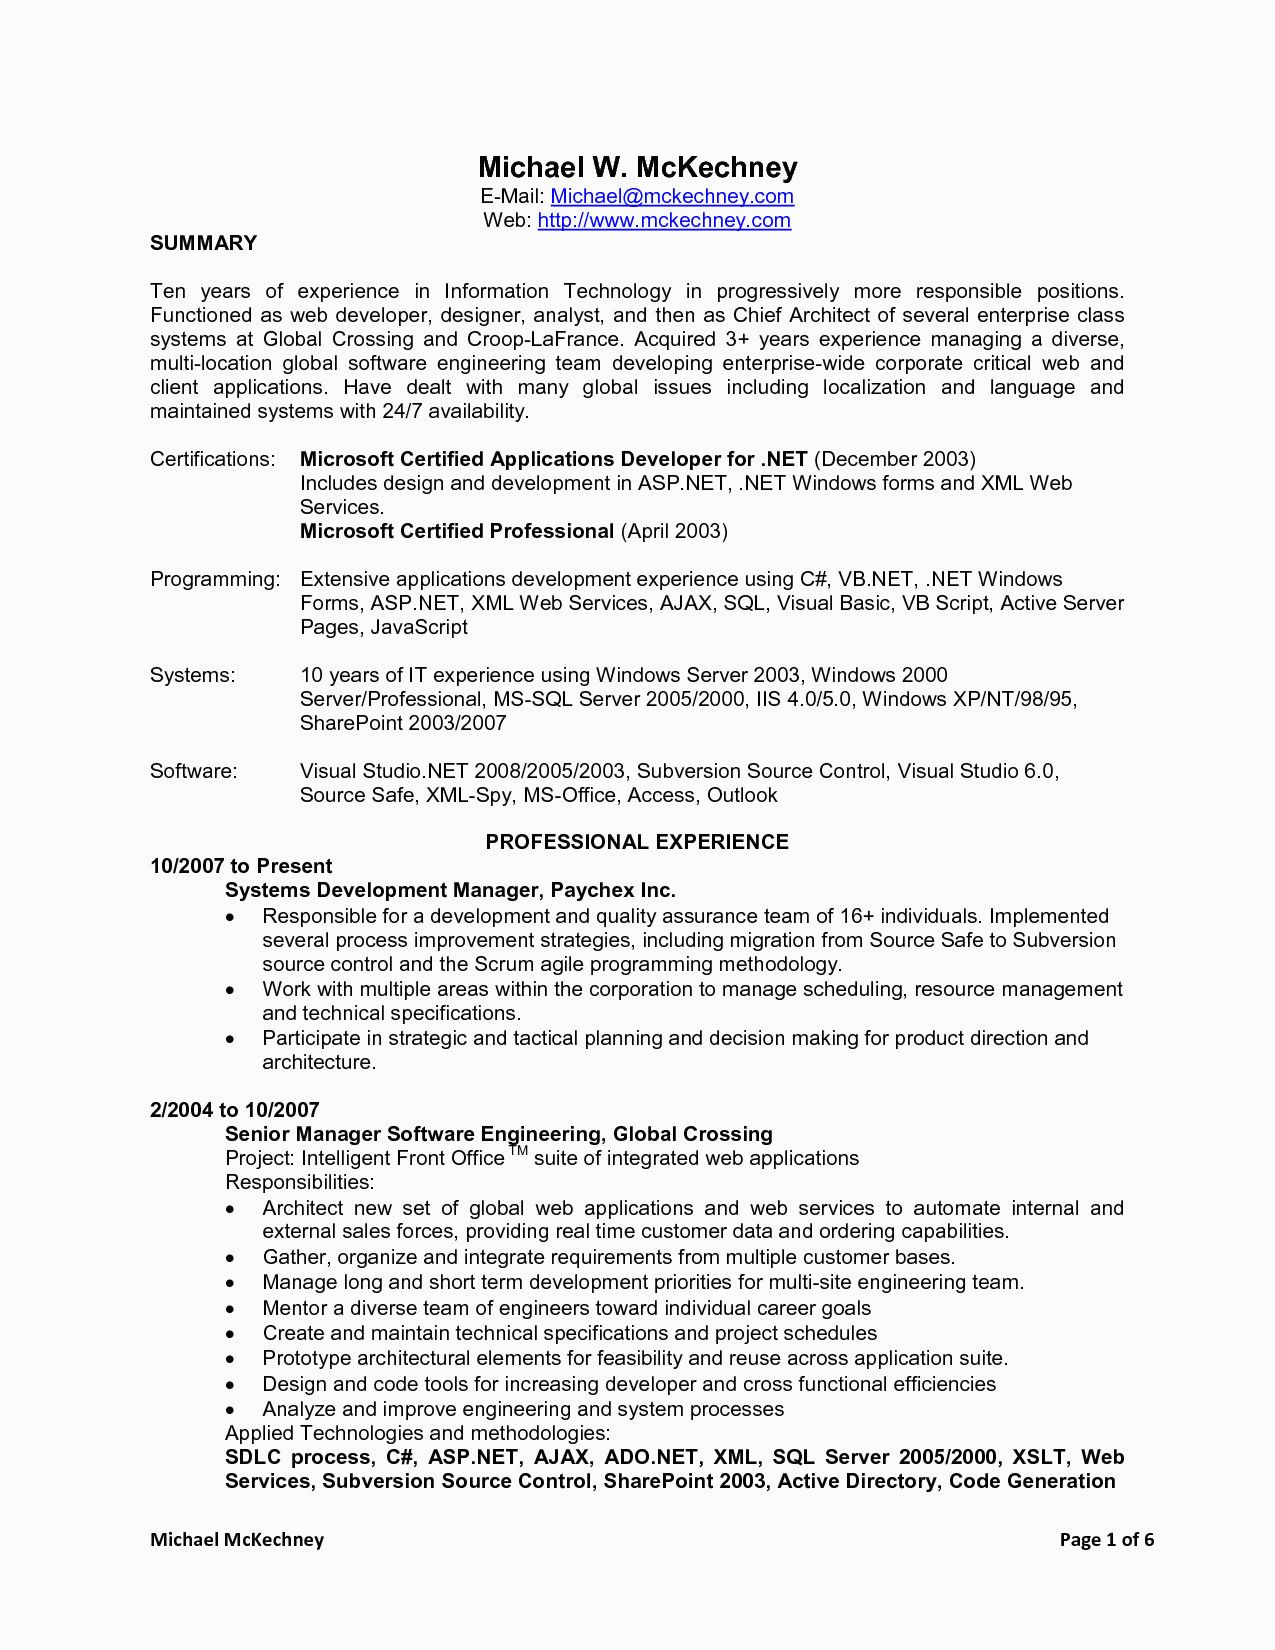 resume format 4 years experience